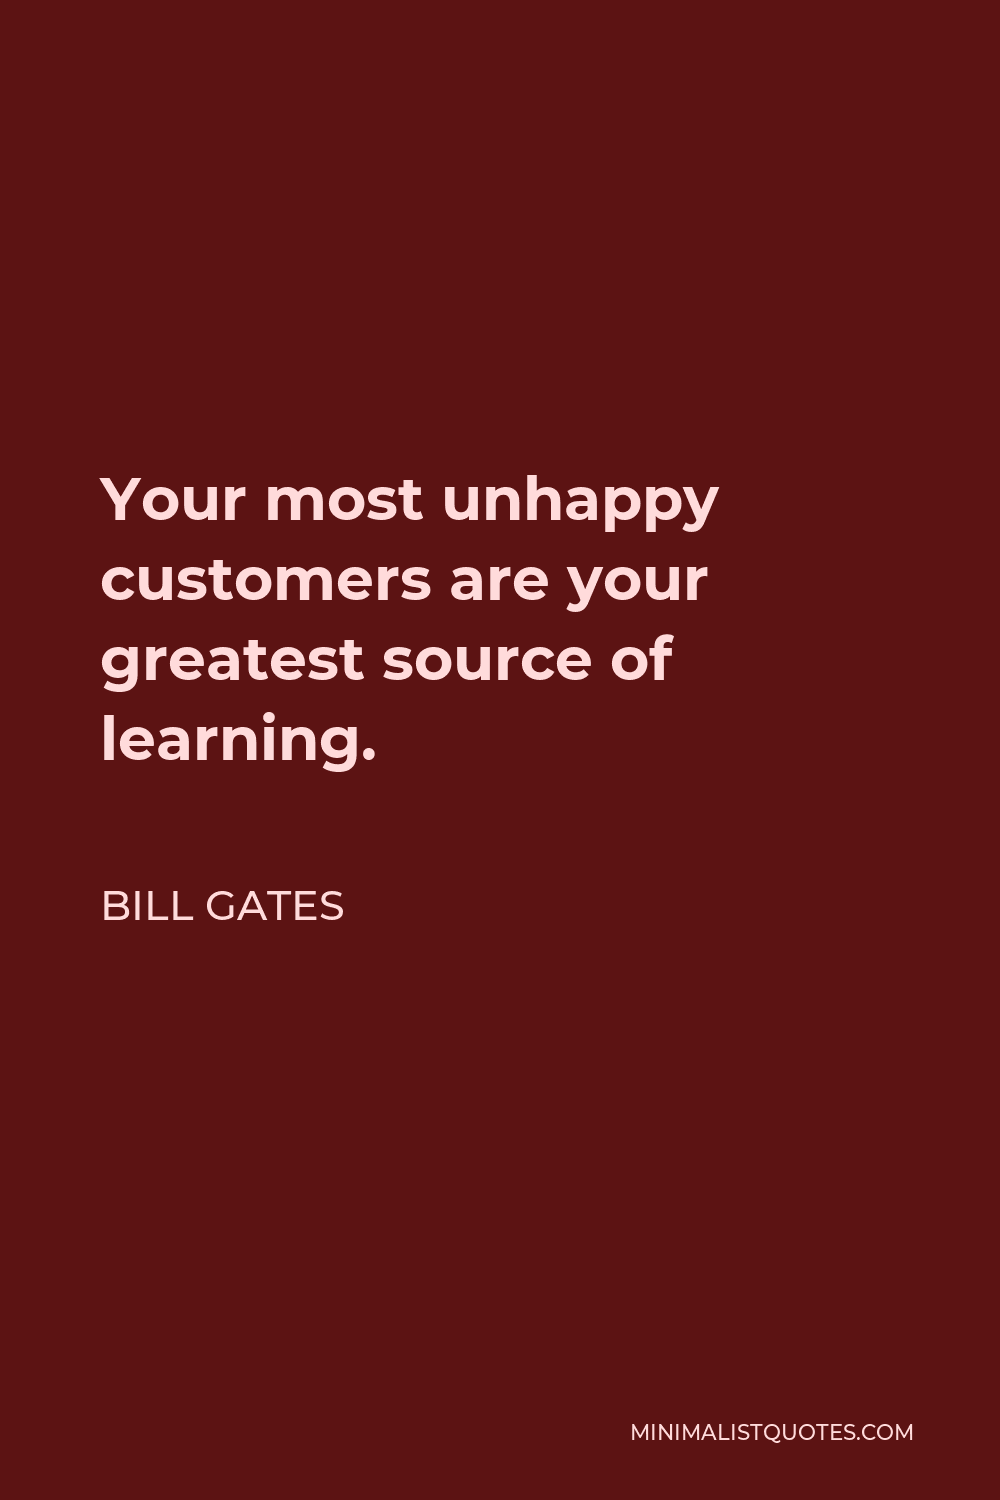 Bill Gates Quote - Your most unhappy customers are your greatest source of learning.